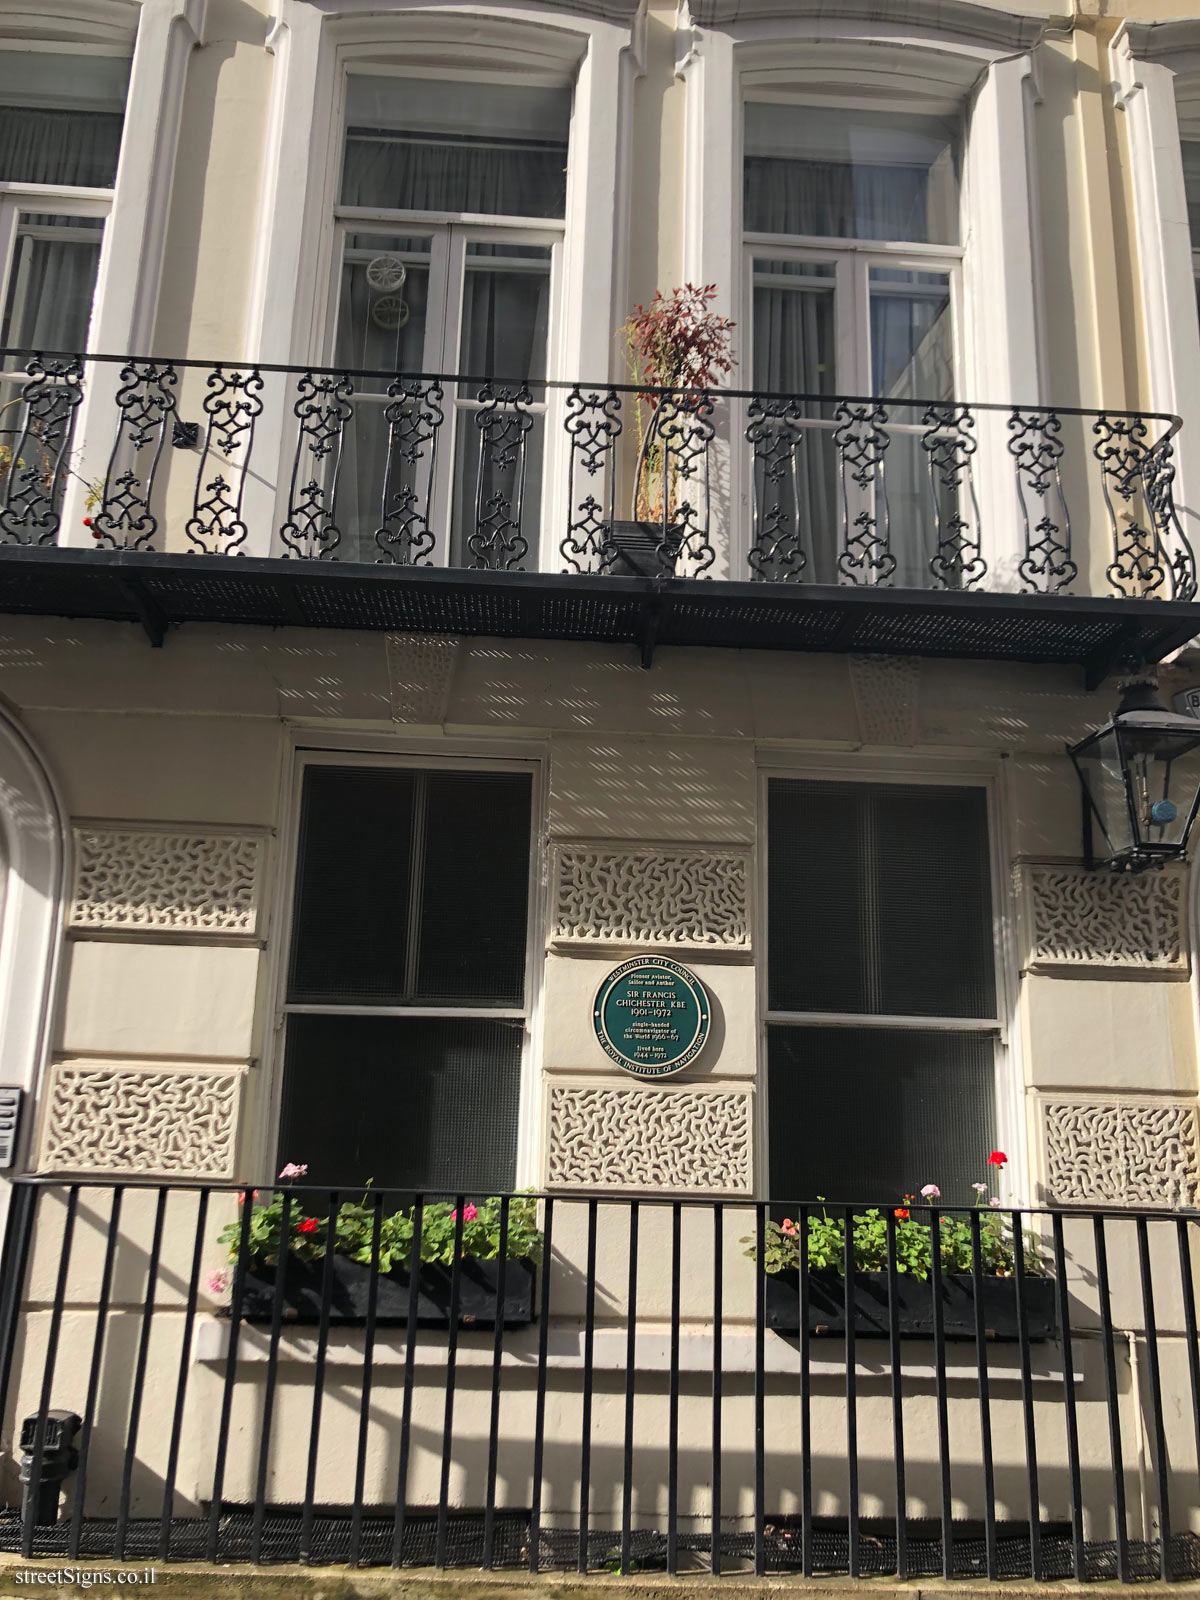 London - Memorial plaque at the residence of Sir Francis Chichester - 9 St James’s Pl, St. James’s, London SW1A 1PE, UK